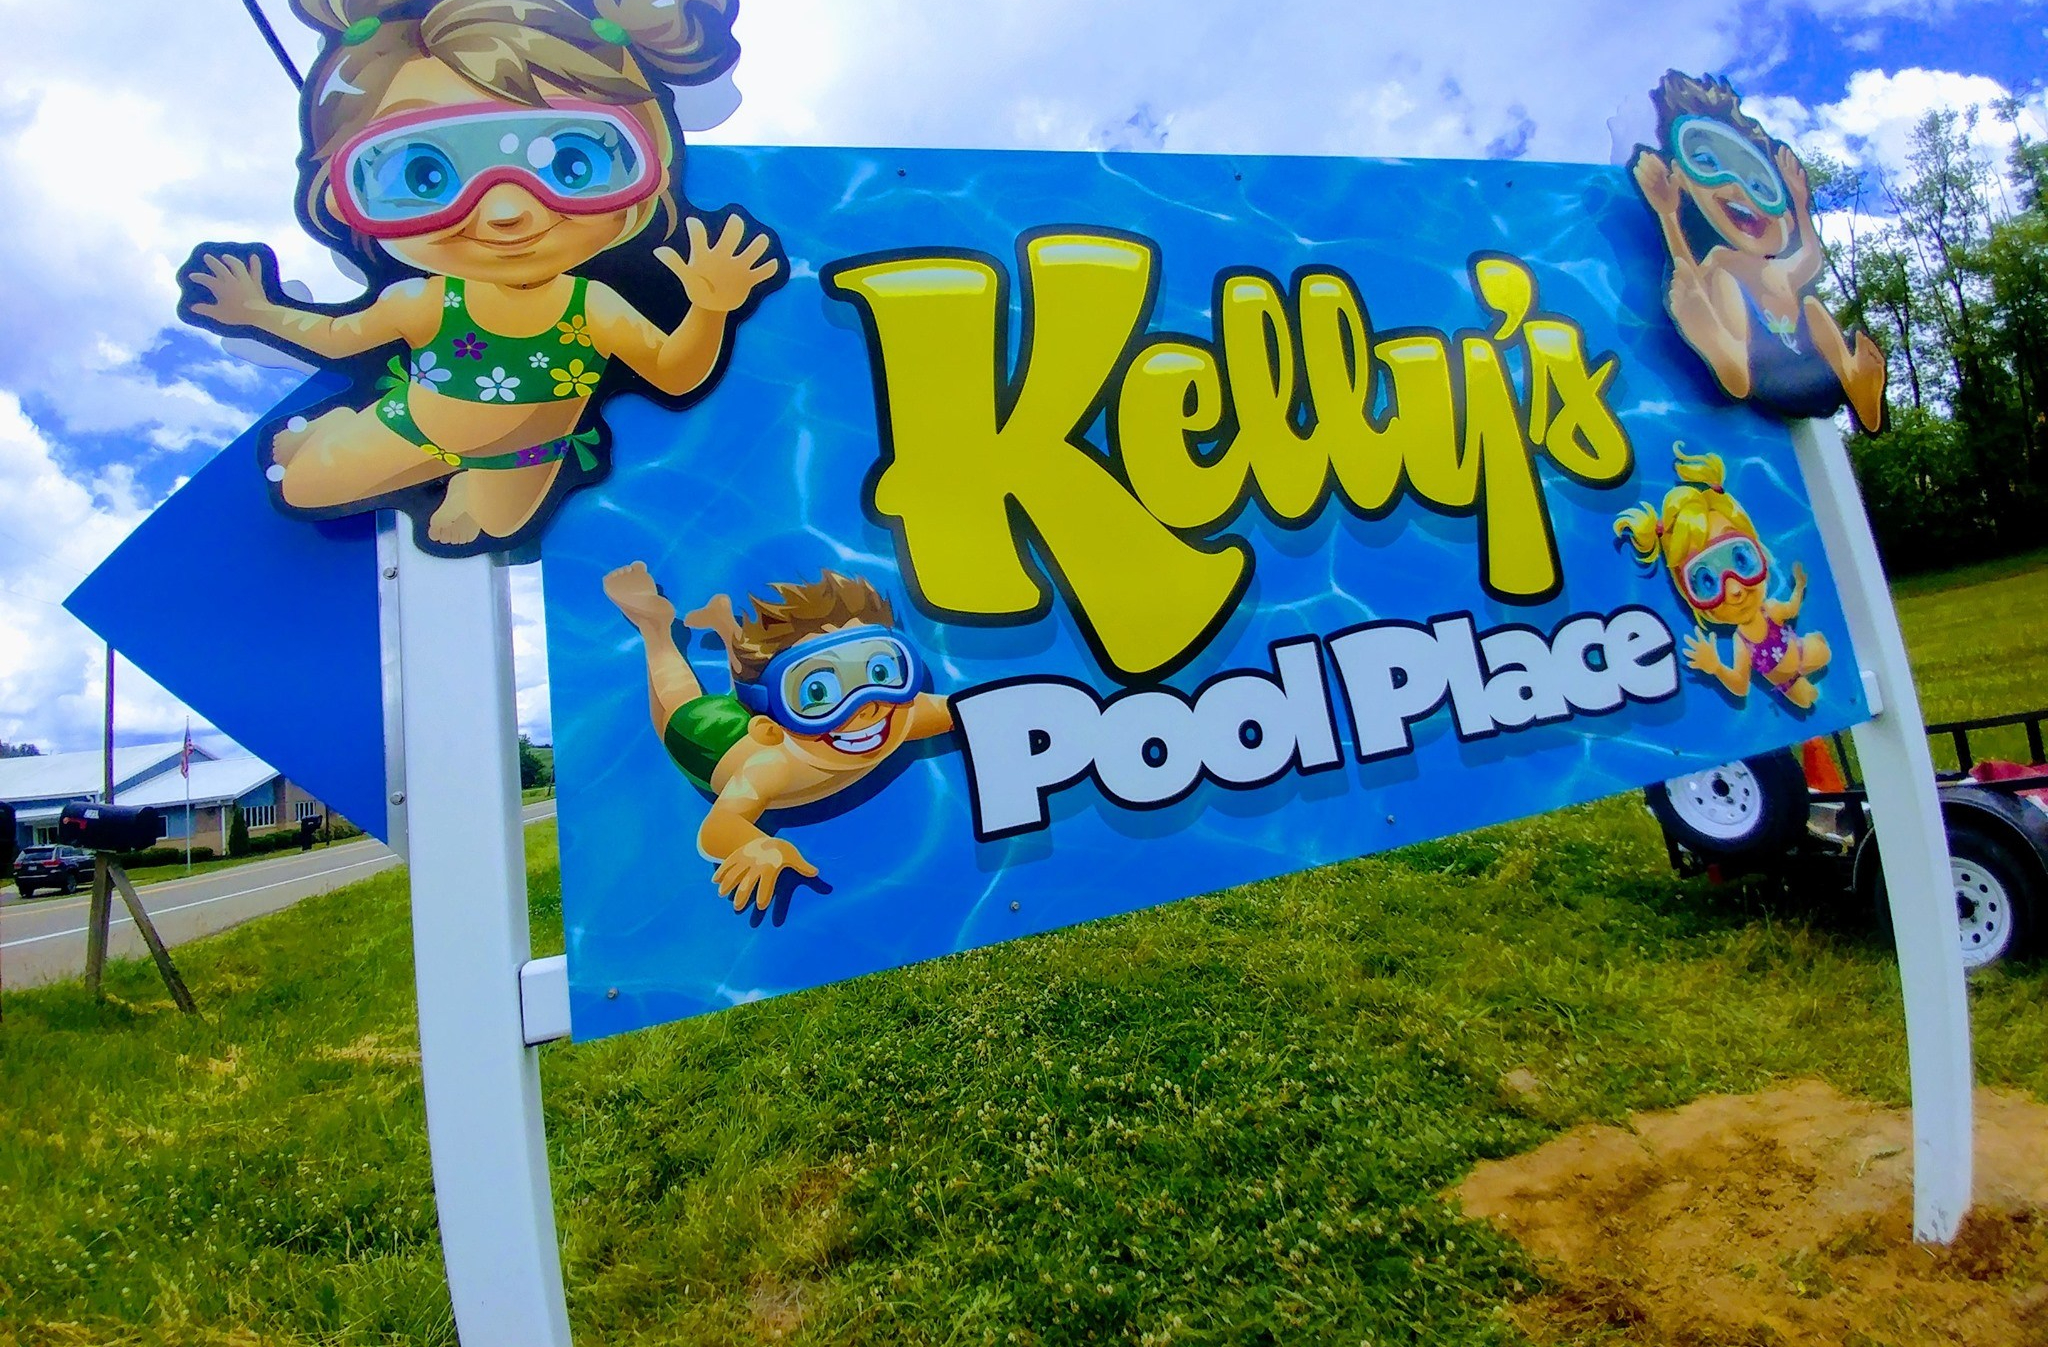 Kelly's Pool Place – Serving The Tuscarawas County, Ohio Area